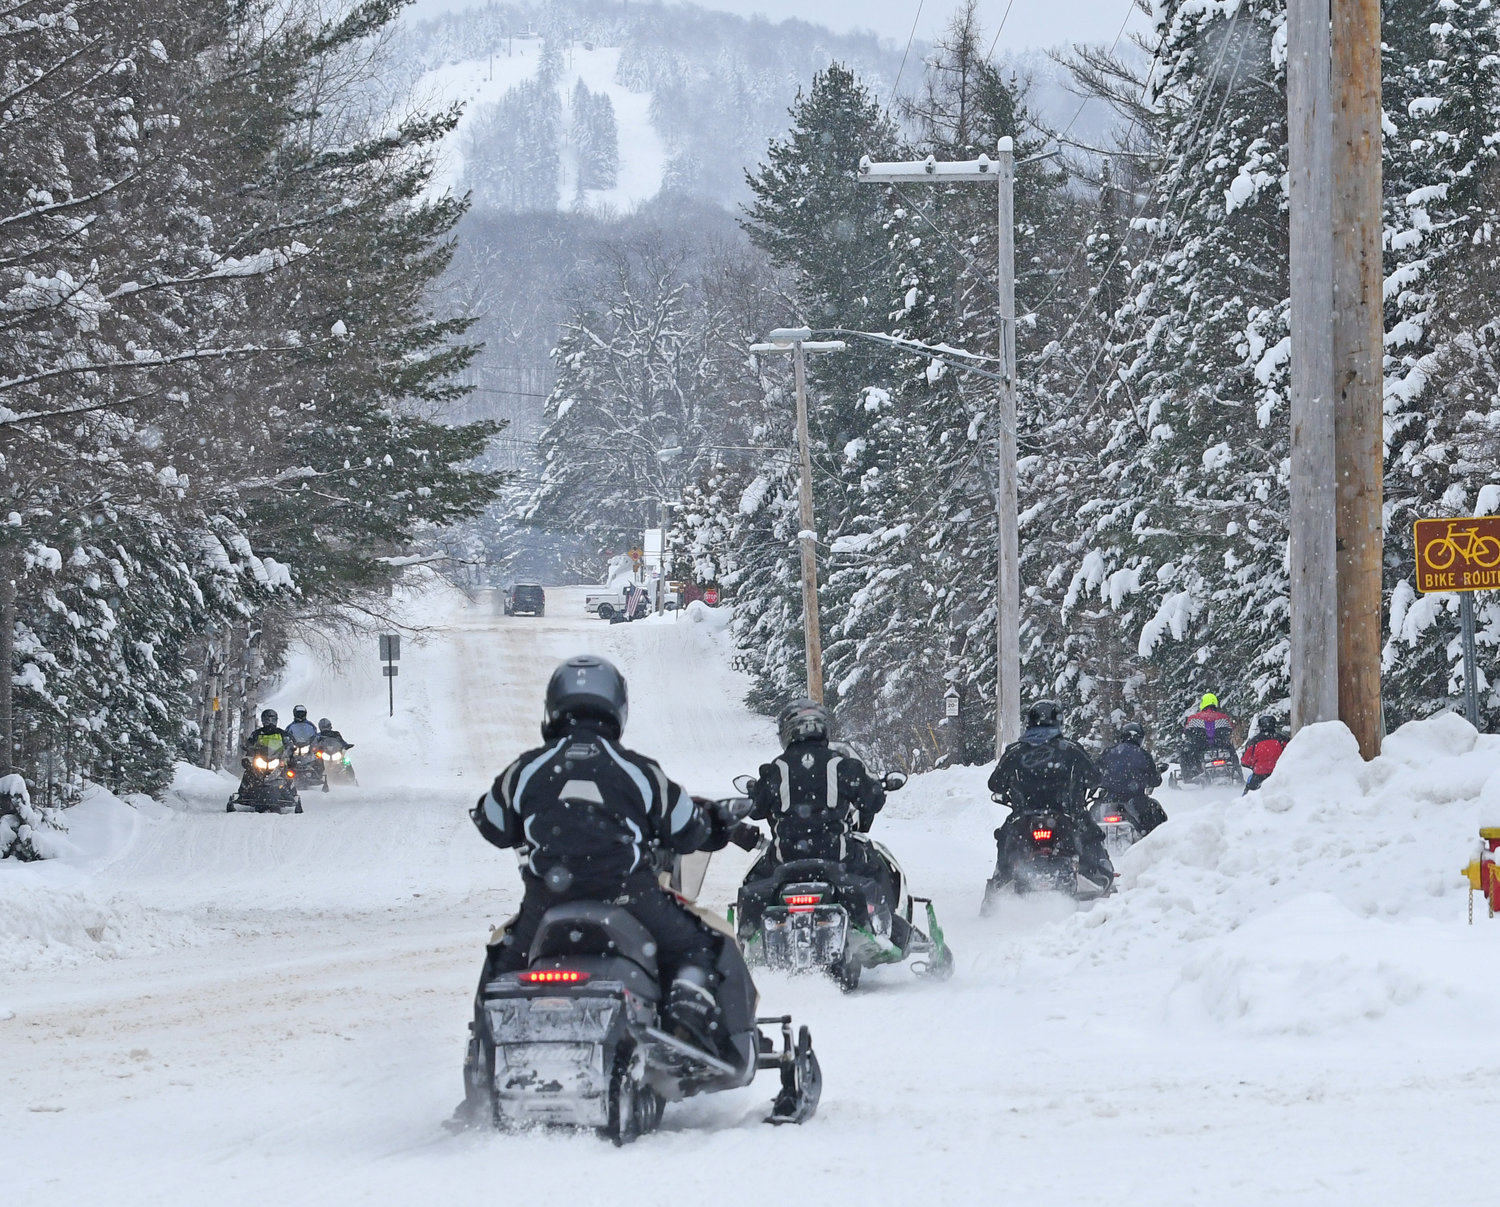 Snowmobiliers in the town of Webb travel down North Street, last year, toward the village of Old Forge with McCauley Mountain in the backgournd.